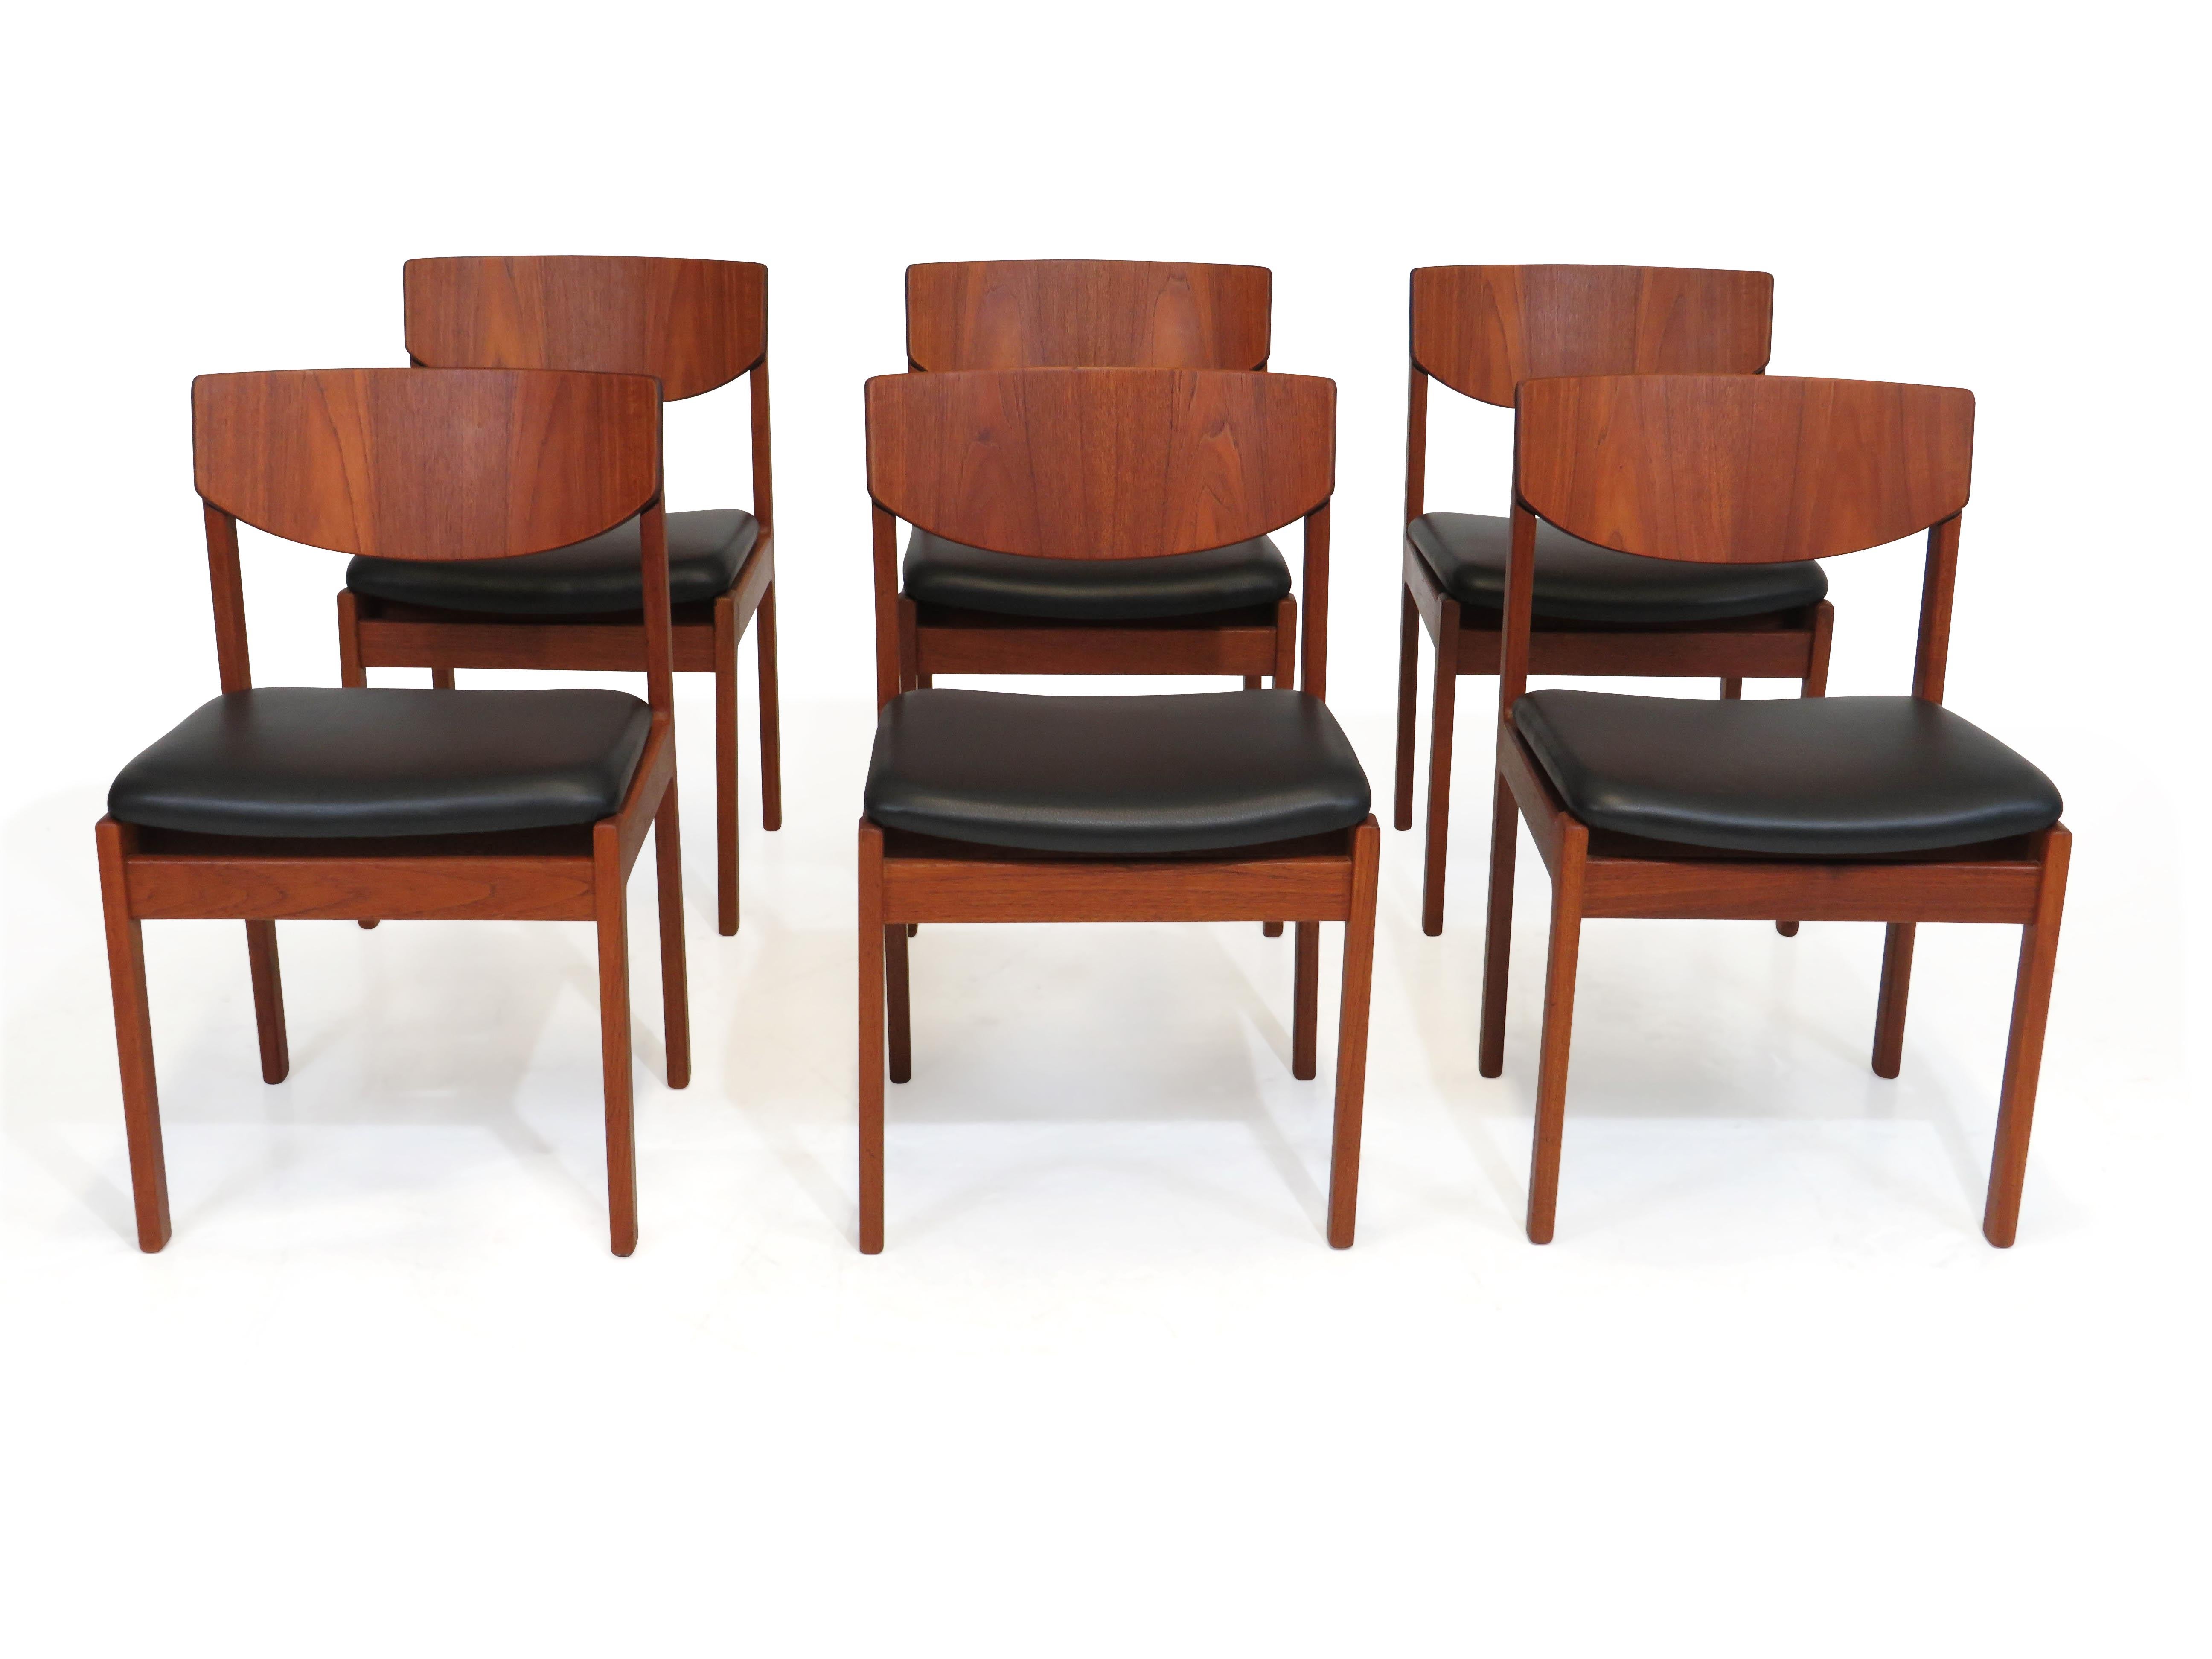 Danish Teak Dining Chairs in New Black Leather For Sale 1